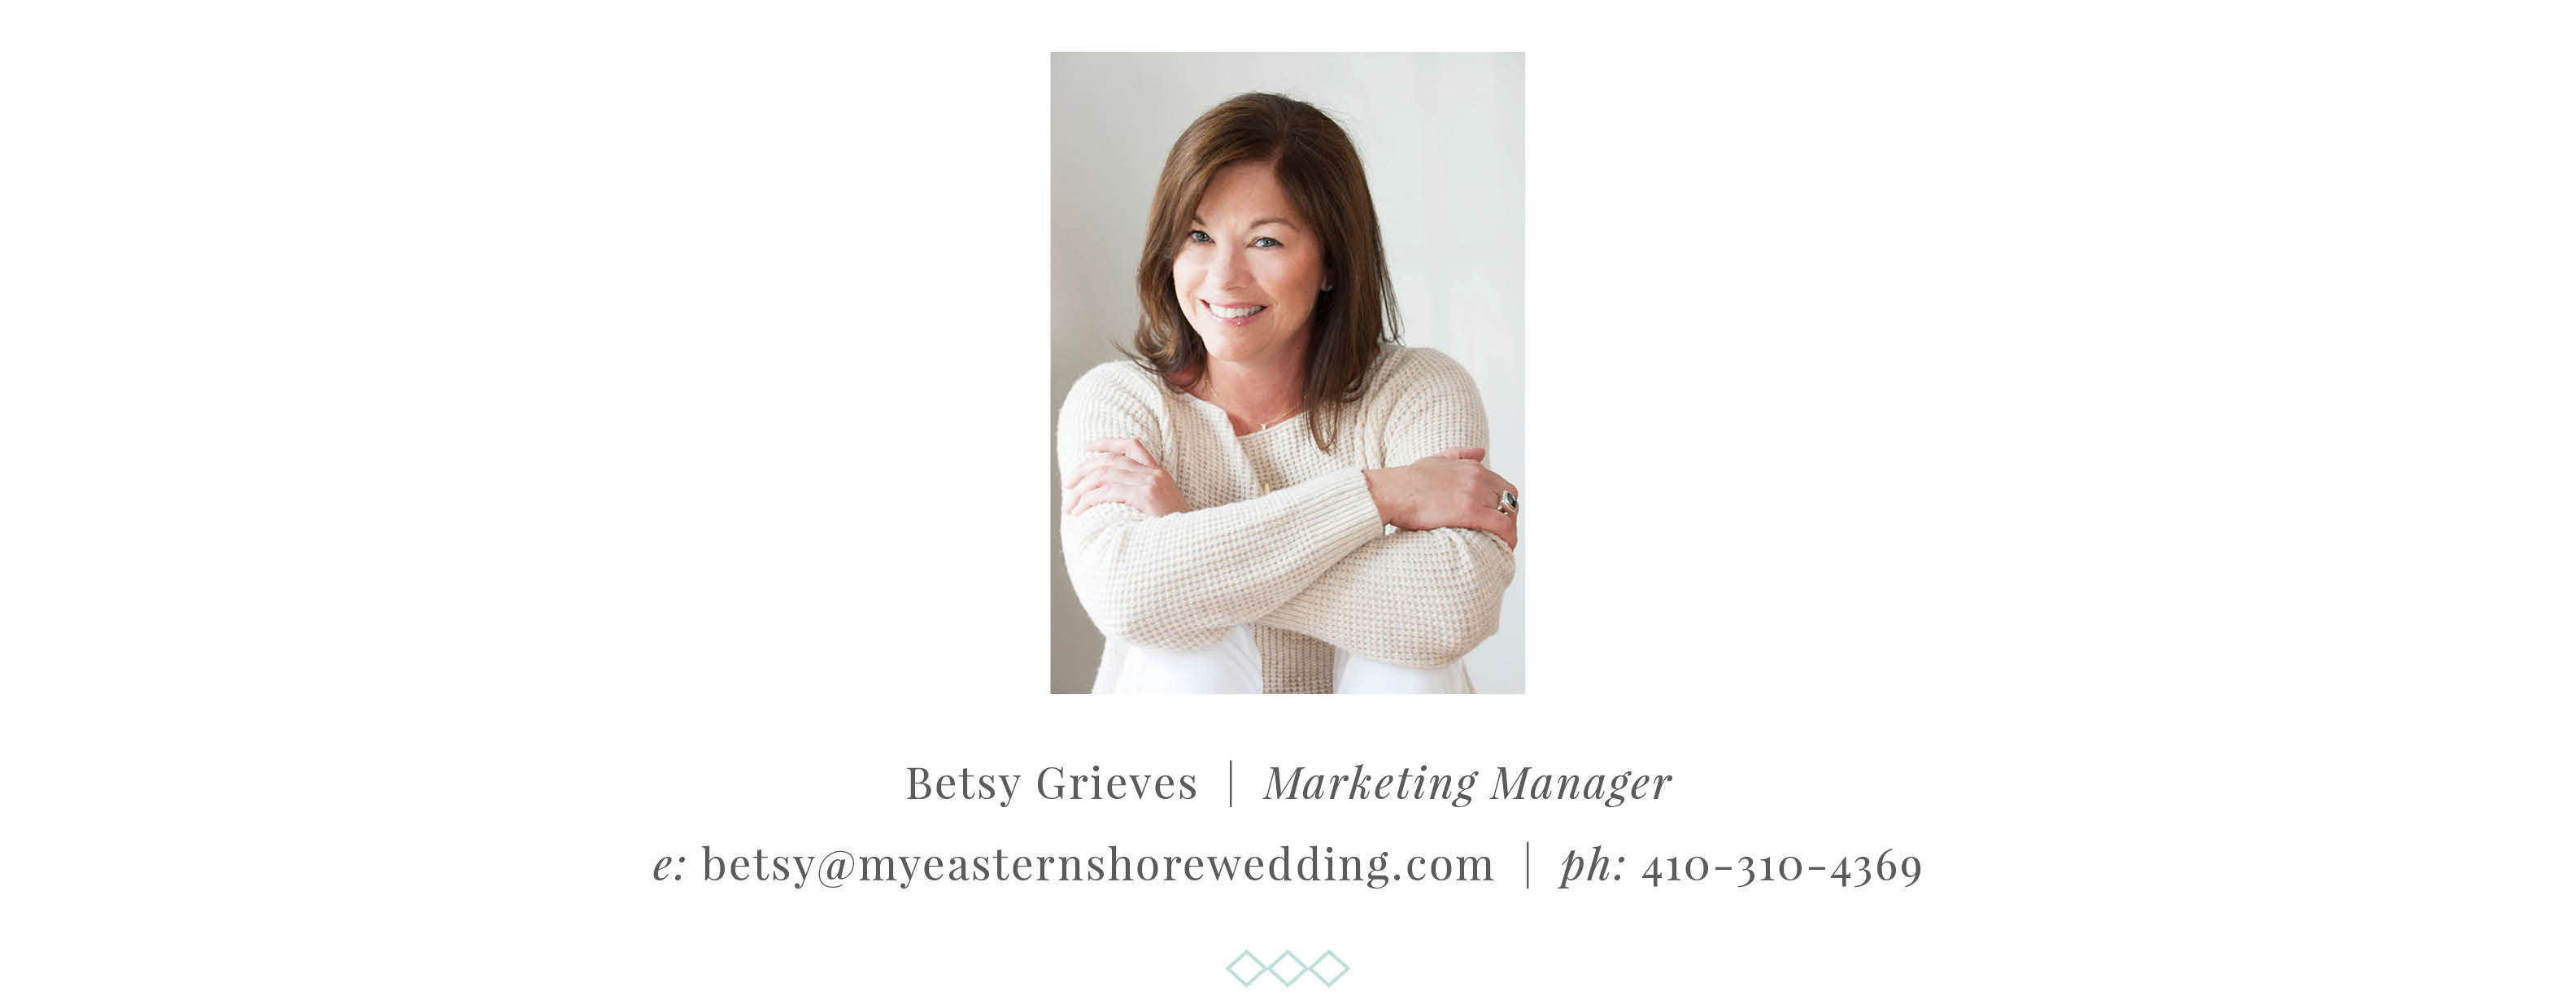 Betsy Grieves